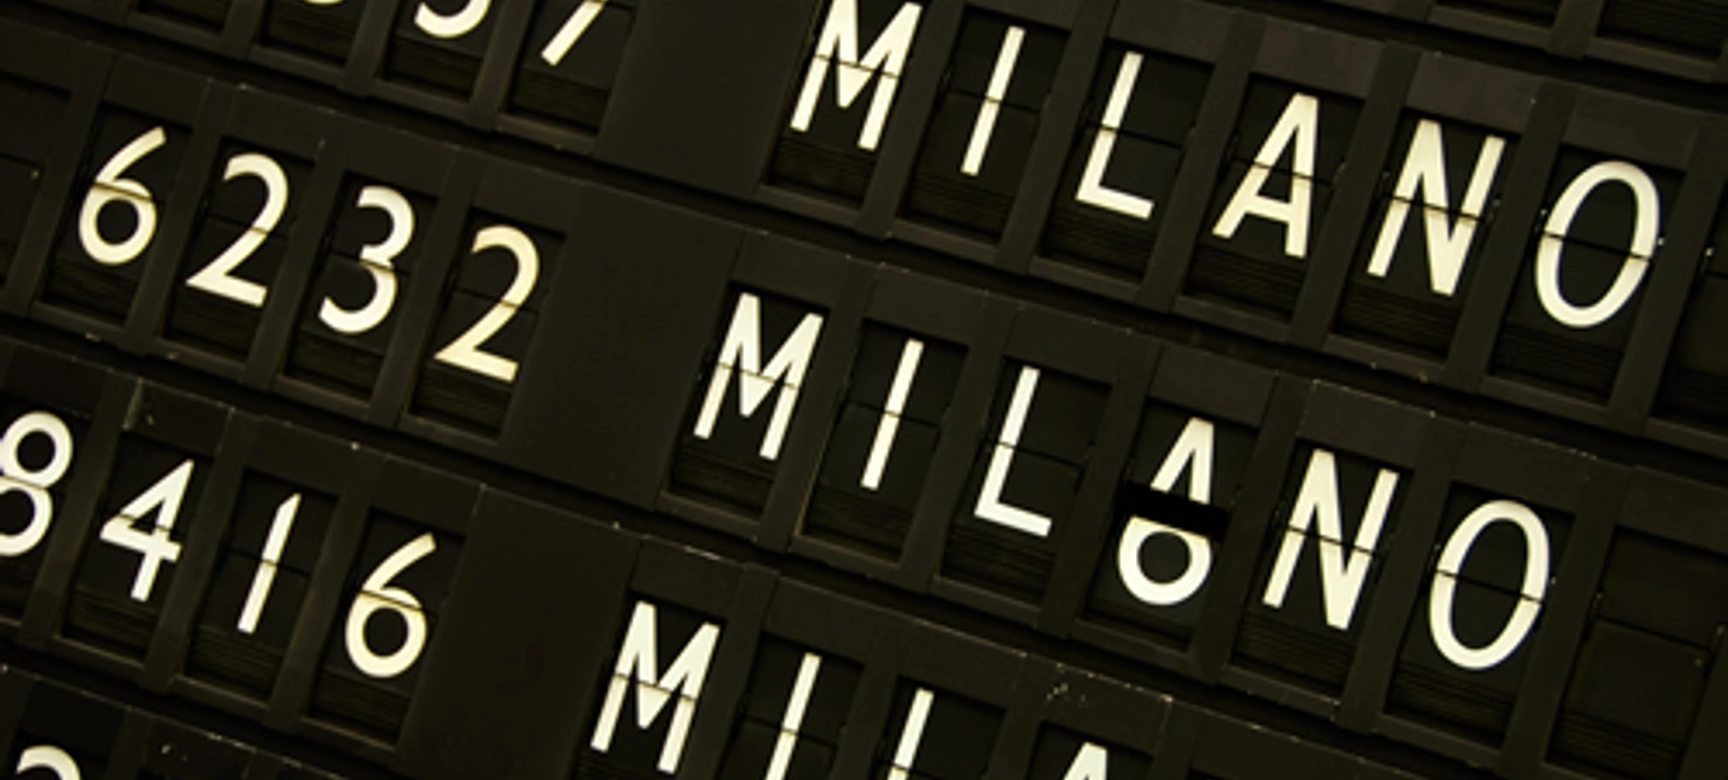 Milan Airports Malpensa & Linate first in Italy to deploy ECAC standard 3 cabin baggage screening systems with Smiths Detection (1)